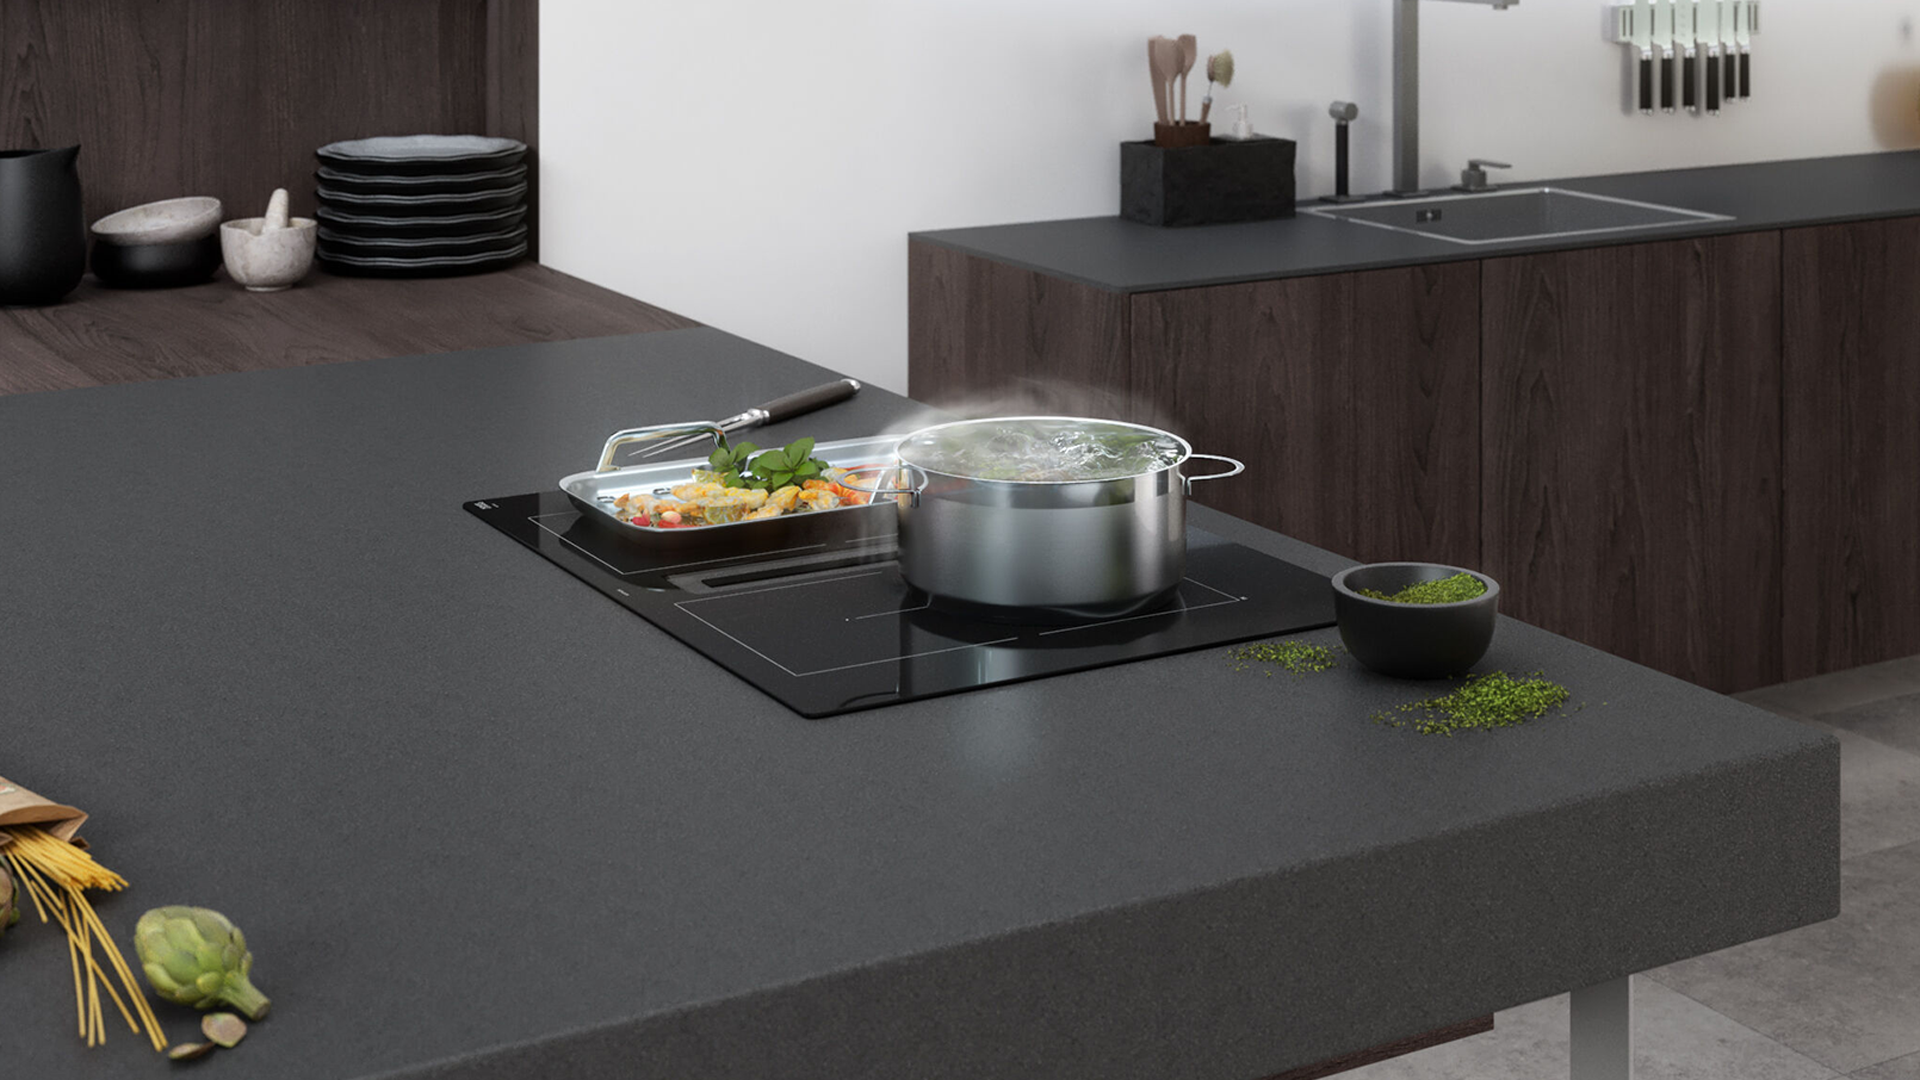 InductionAir Plus by the combination of minimal design with a cutting-edge ventilation system - Blog - Cucine LUBE